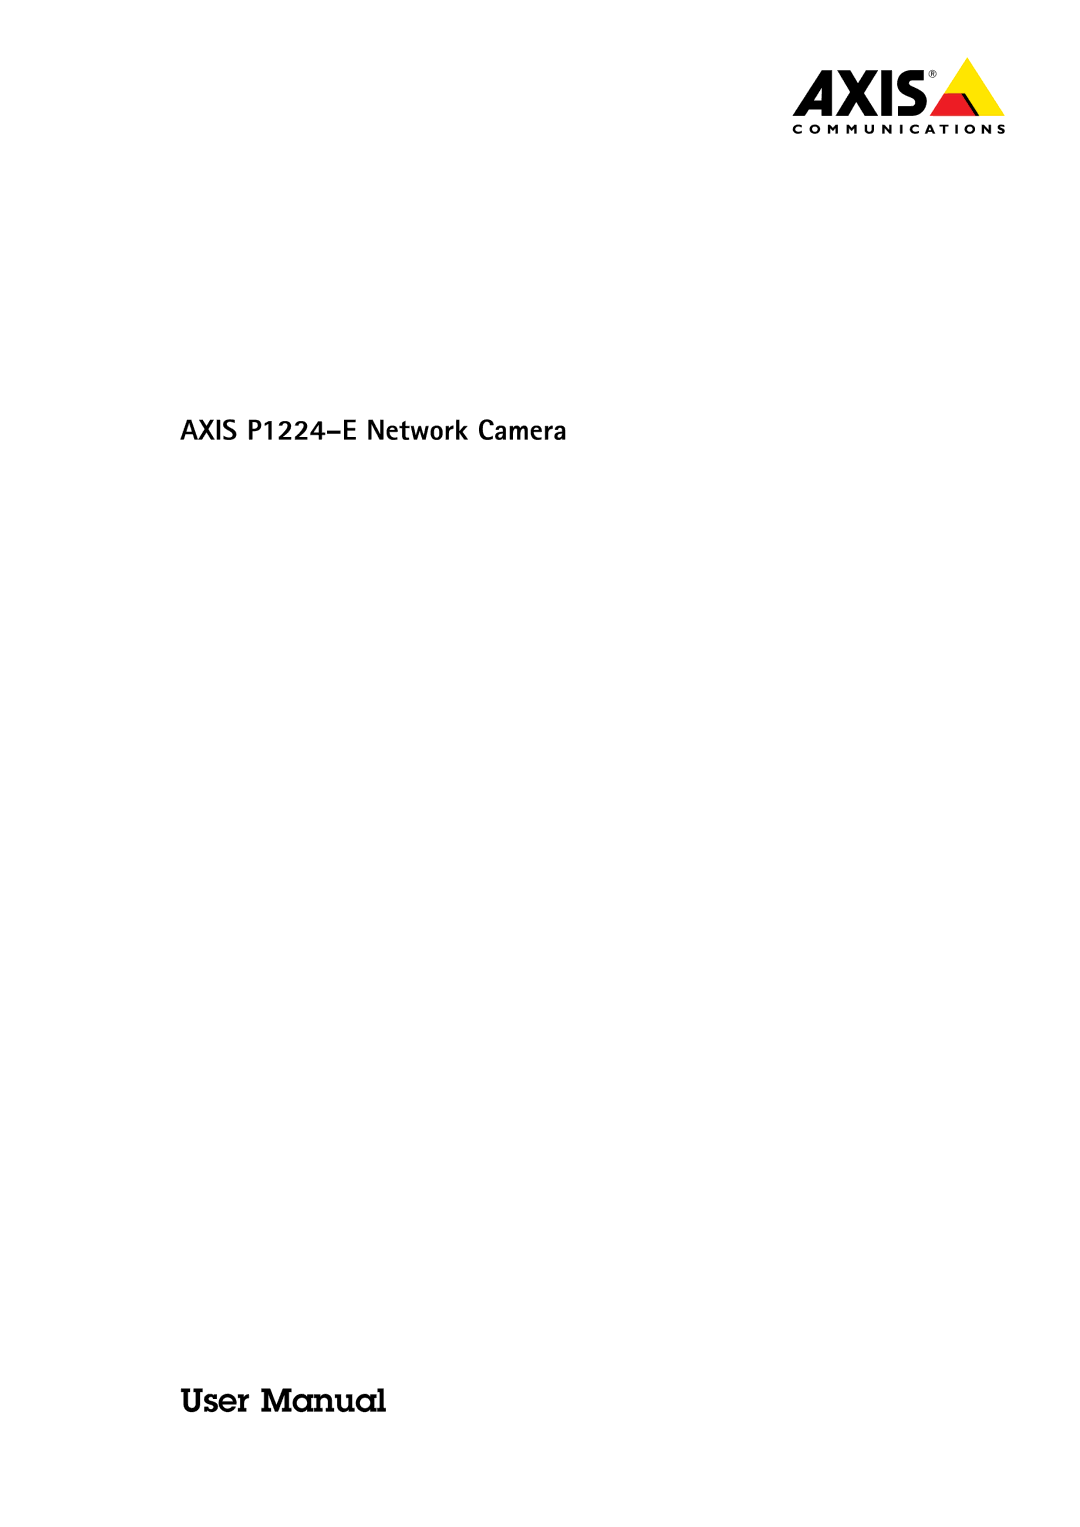 Axis Communications user manual Axis P1224-E Network Camera 